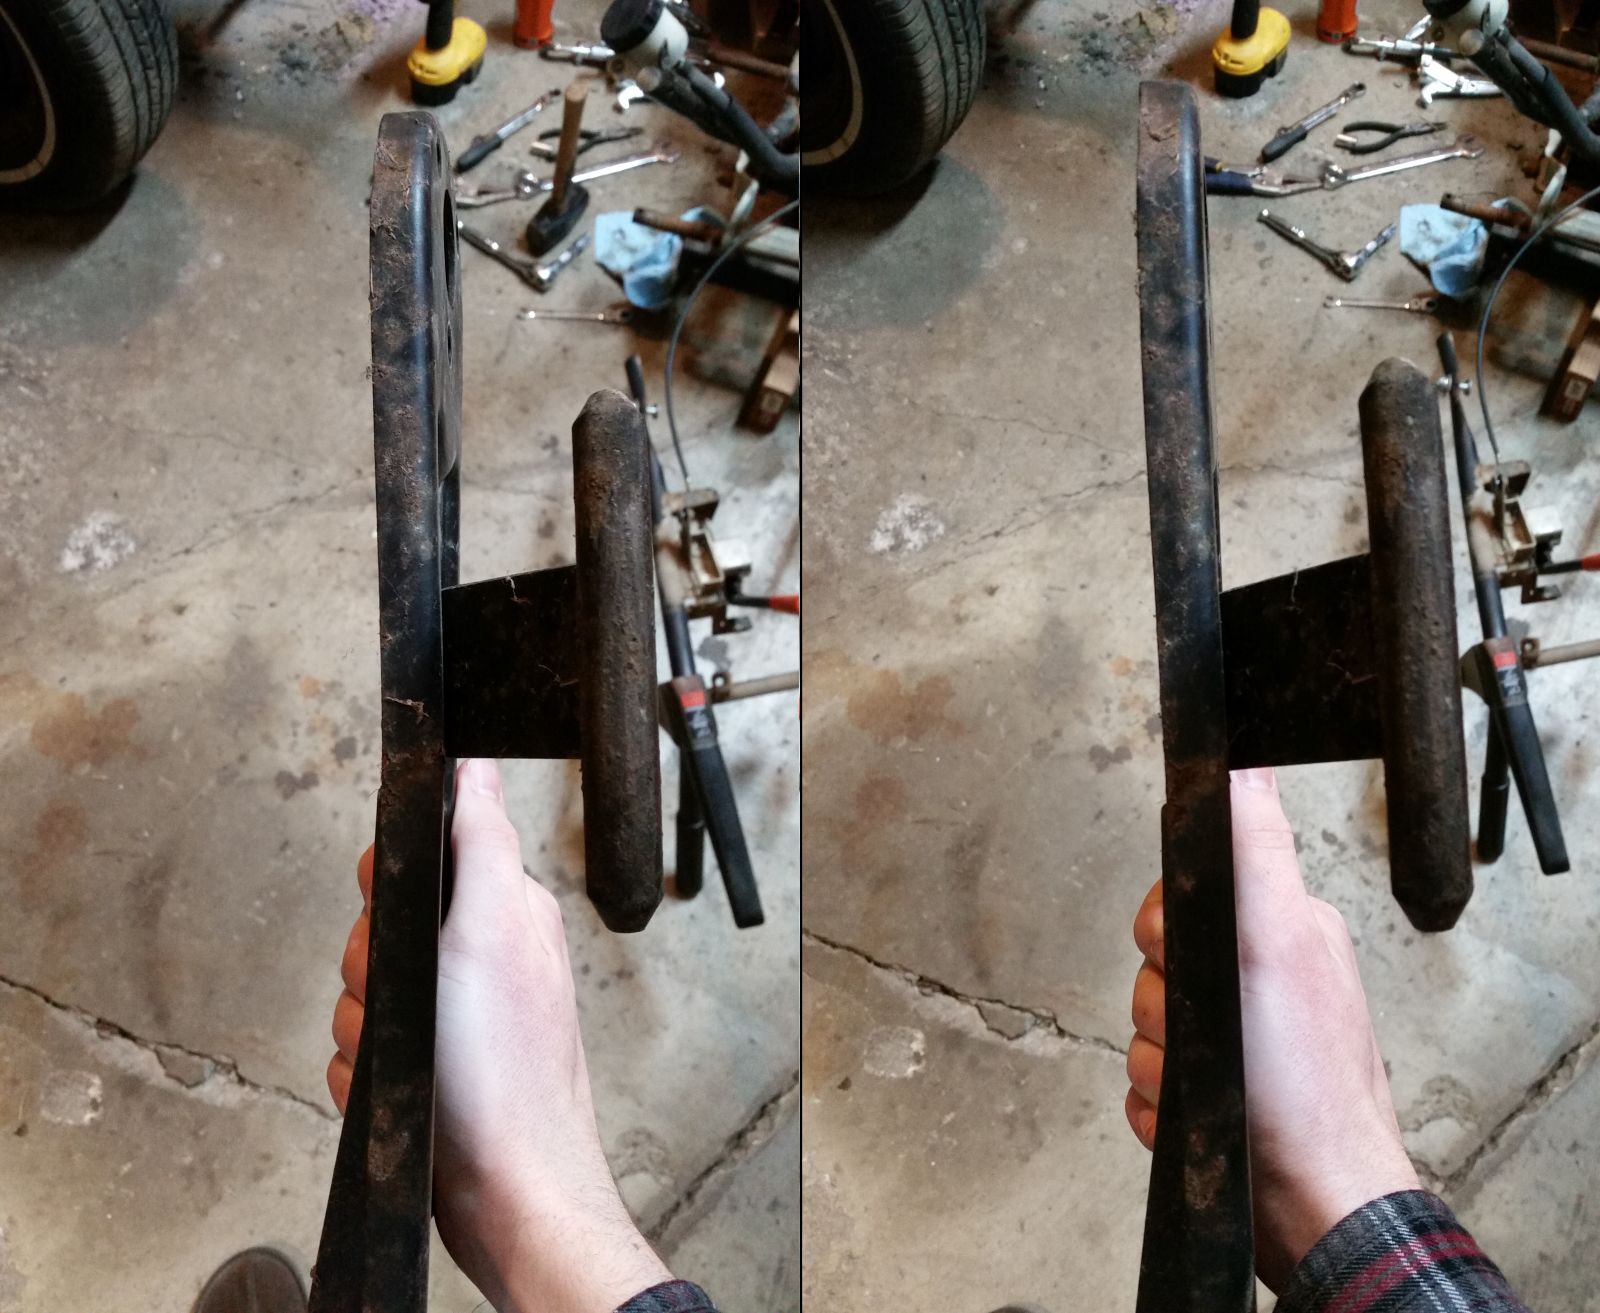 This was twisted and bowed, and is now back how it should be. The right side is the face that matters; the depth of the folded part varies so the left edge still looks wonky. This was more vice-and-crowbar than hammer-and-anvil.